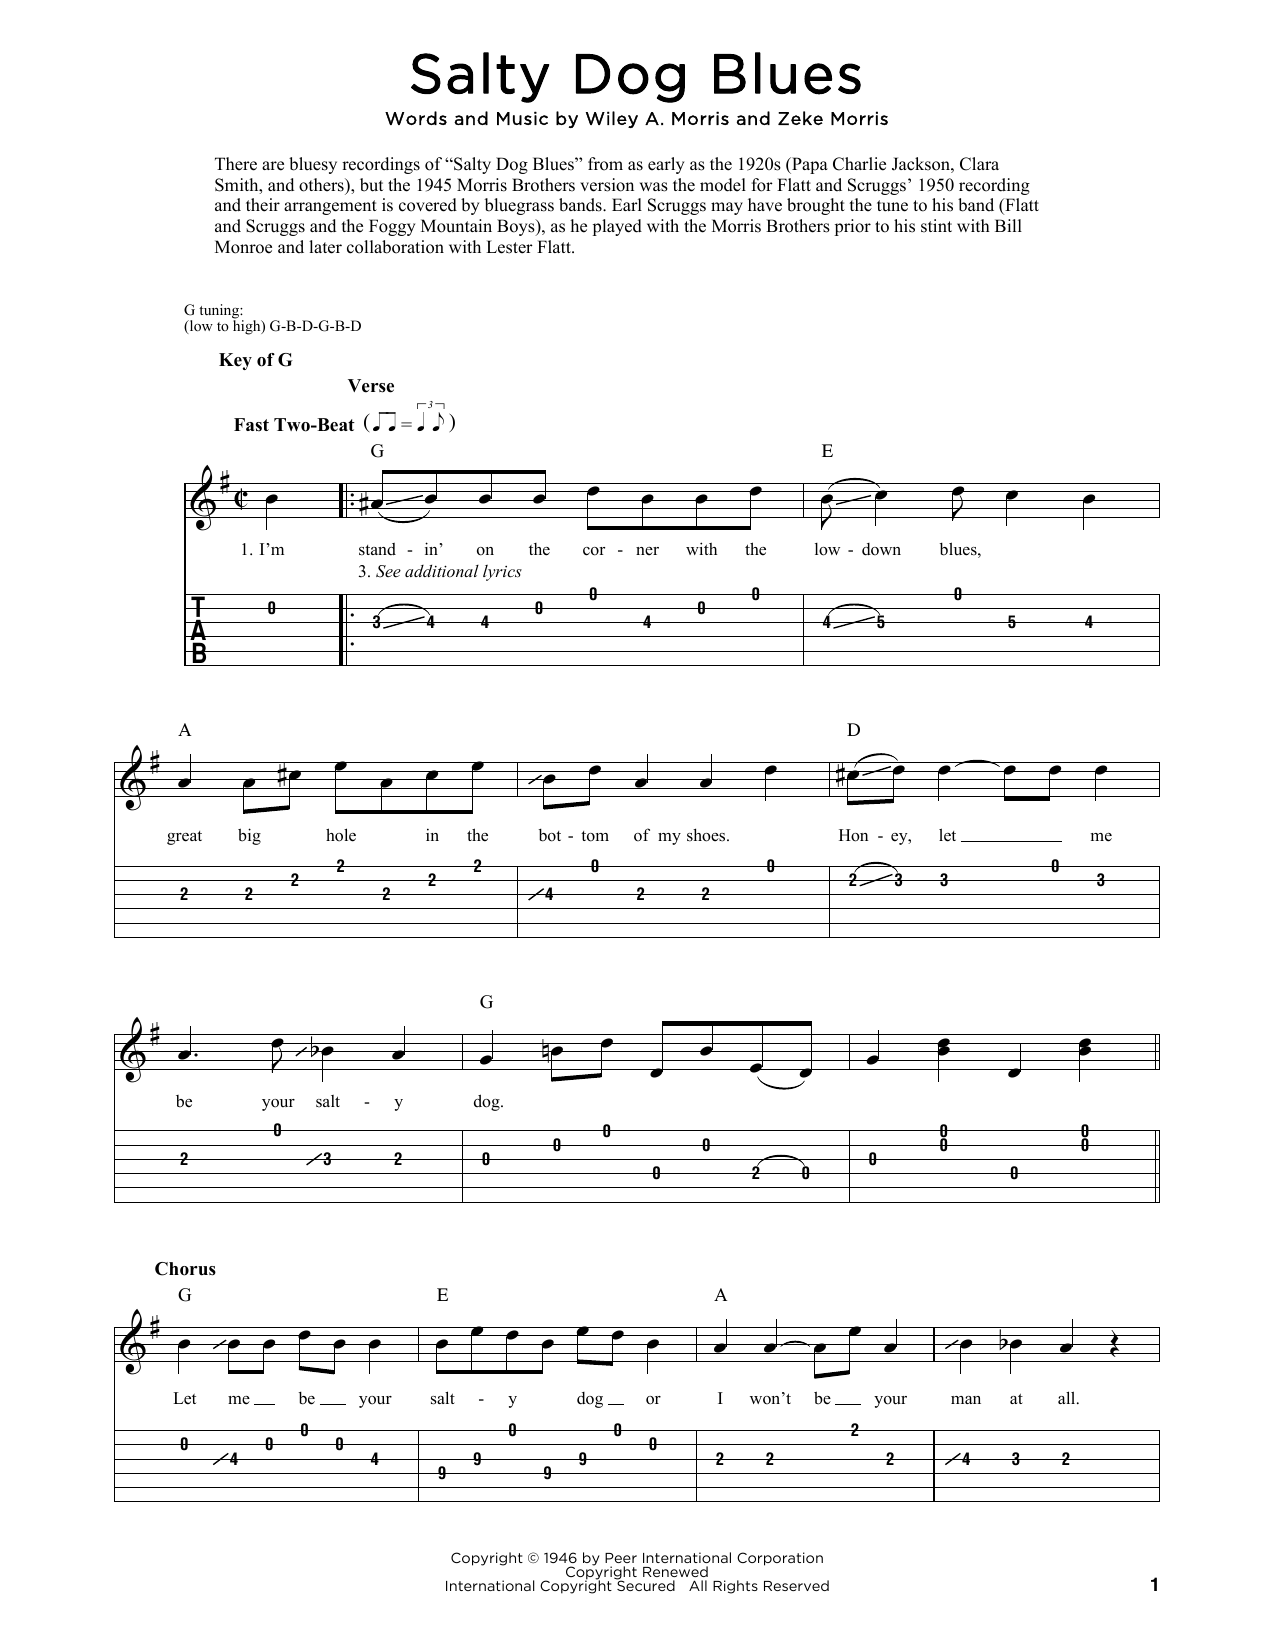 Download The Morris Brothers Salty Dog Blues Sheet Music